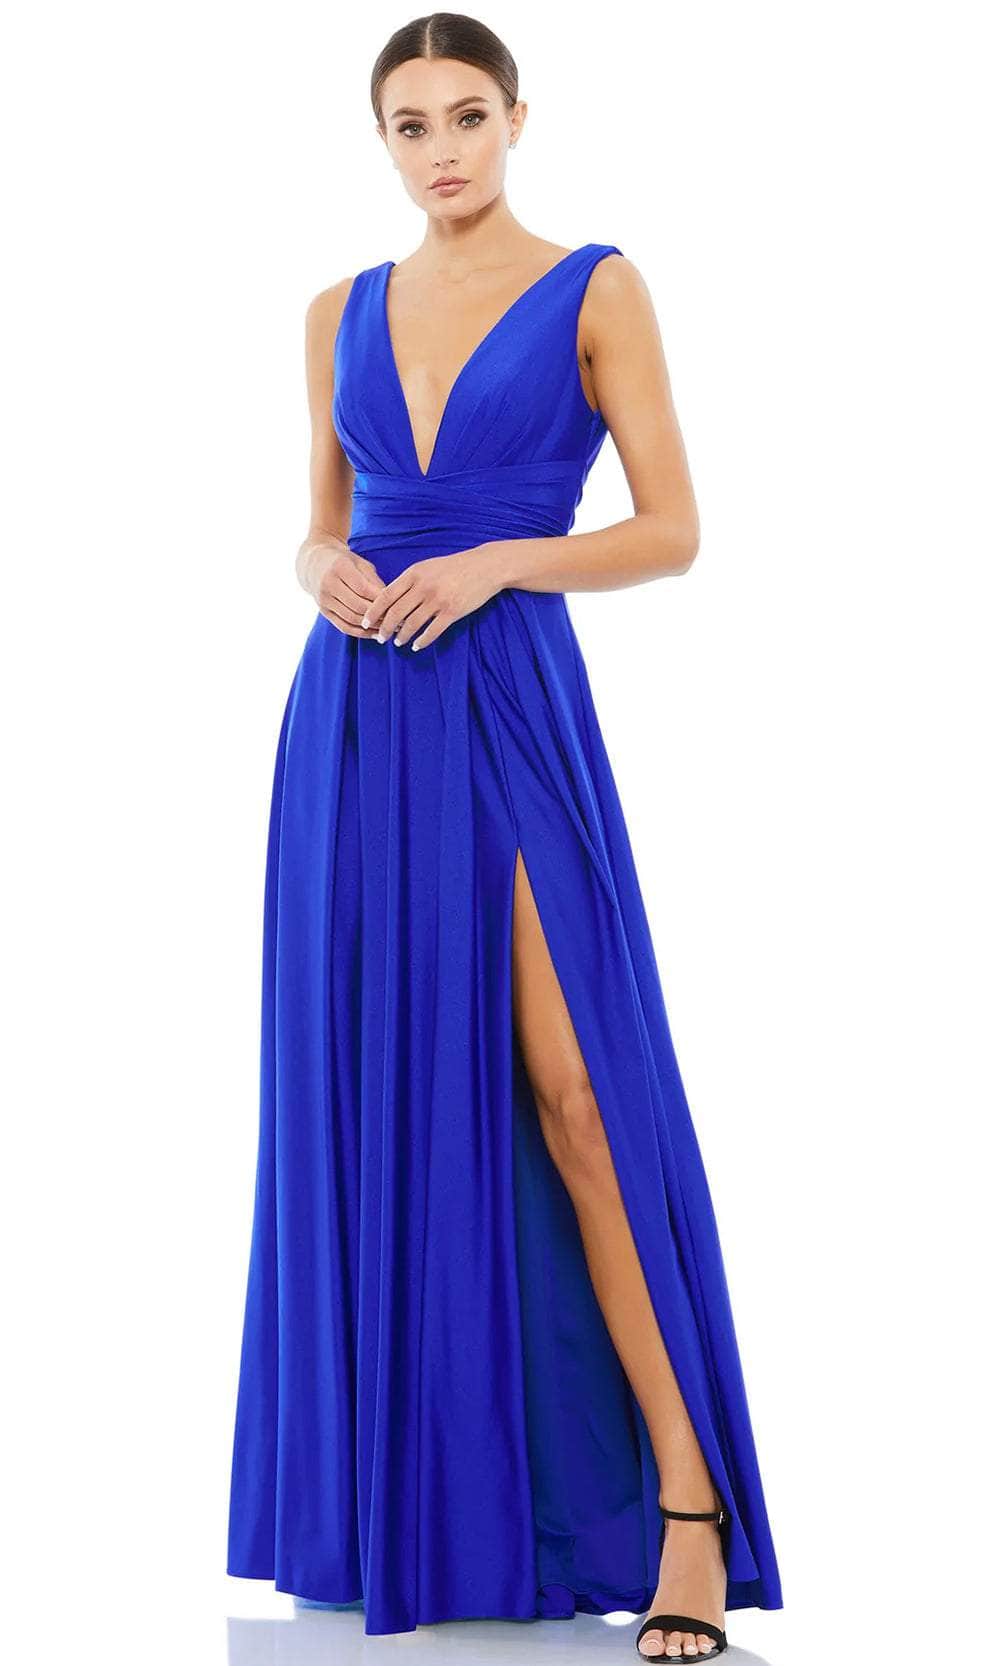 Ieena Duggal 26578 - Plunging V-Neck Jersey Evening Gown
